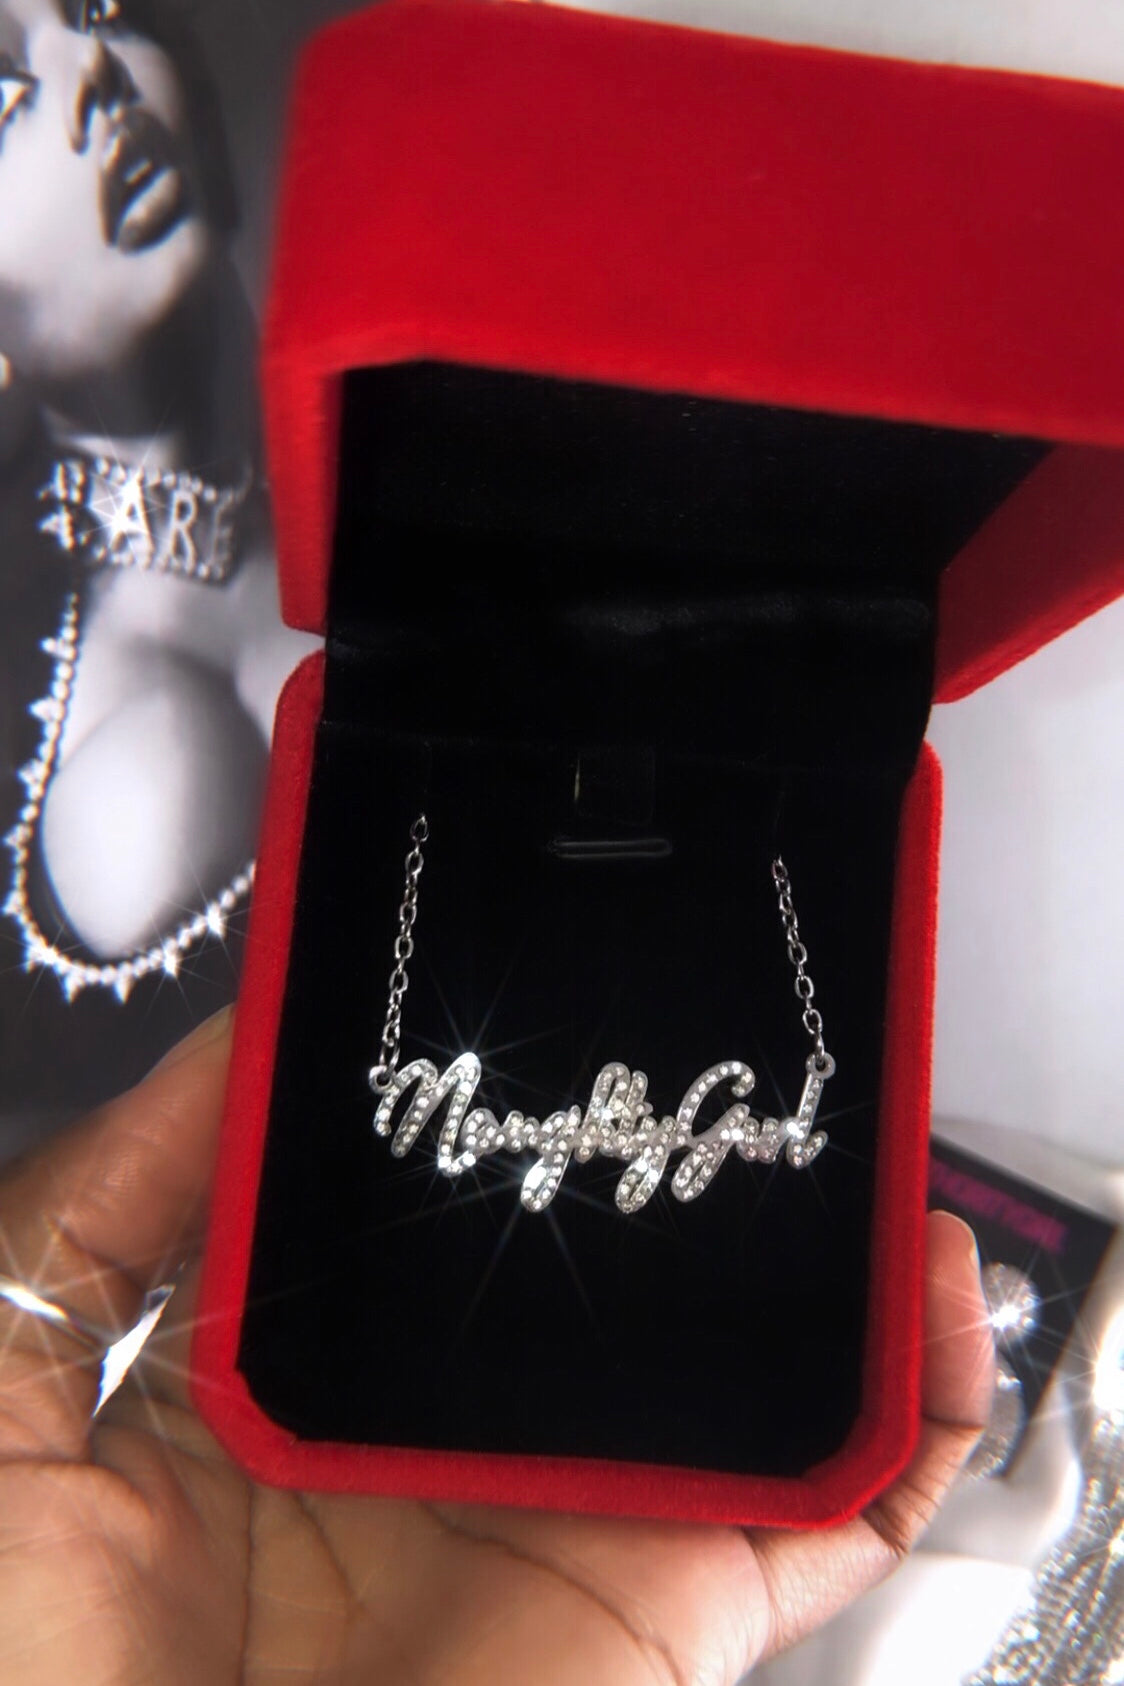 NAUGHTY GIRL Necklace